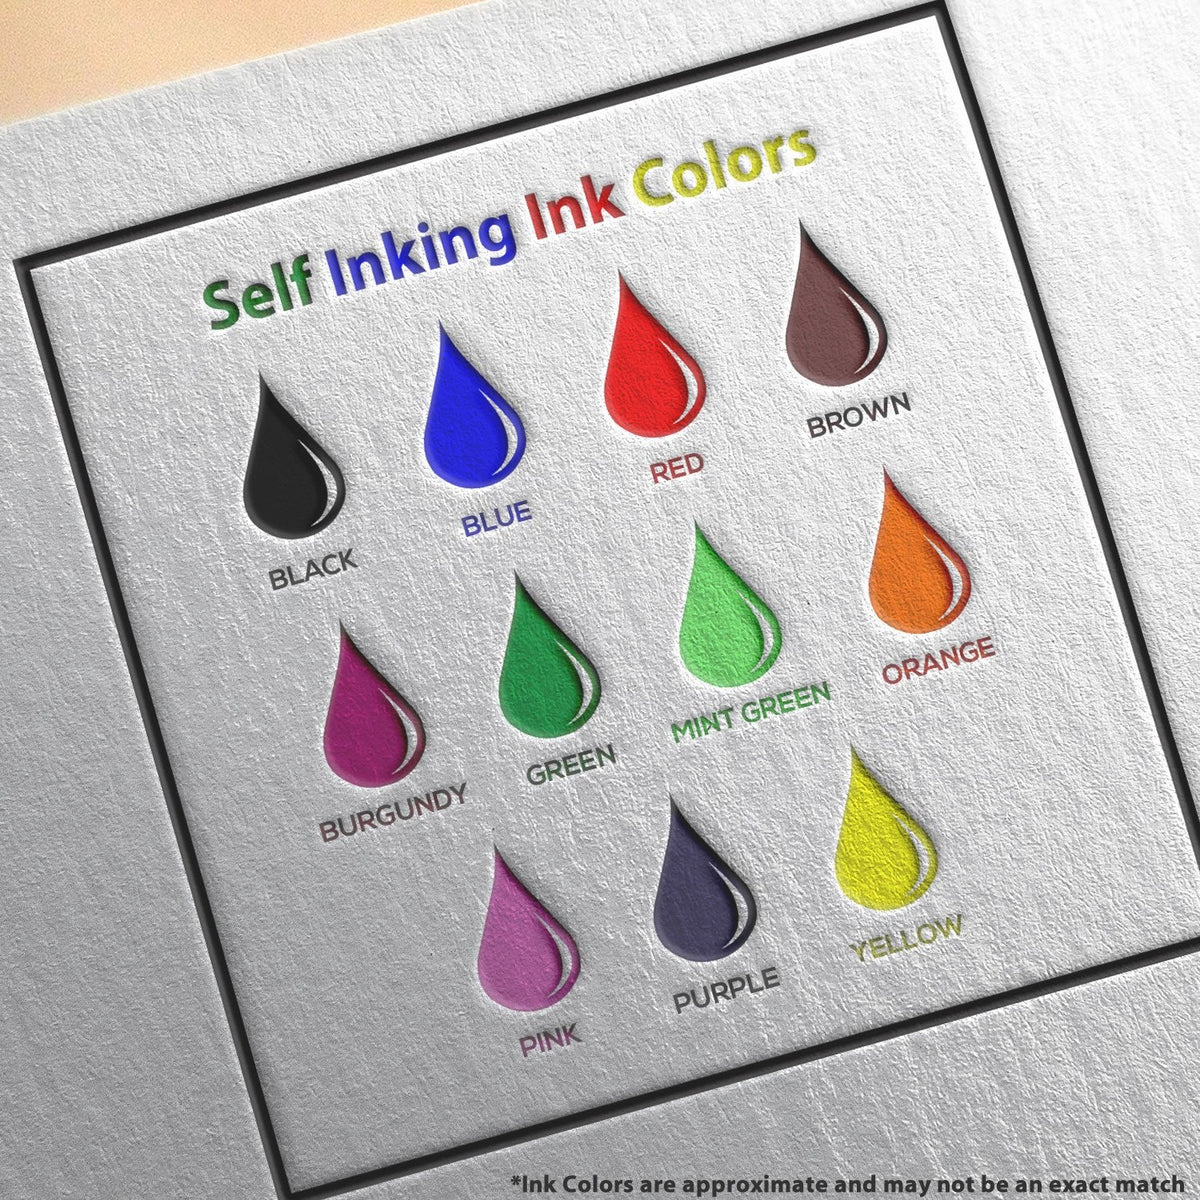 Self-Inking Please Pay Now No Statements will be Sent Stamp Ink Color Options